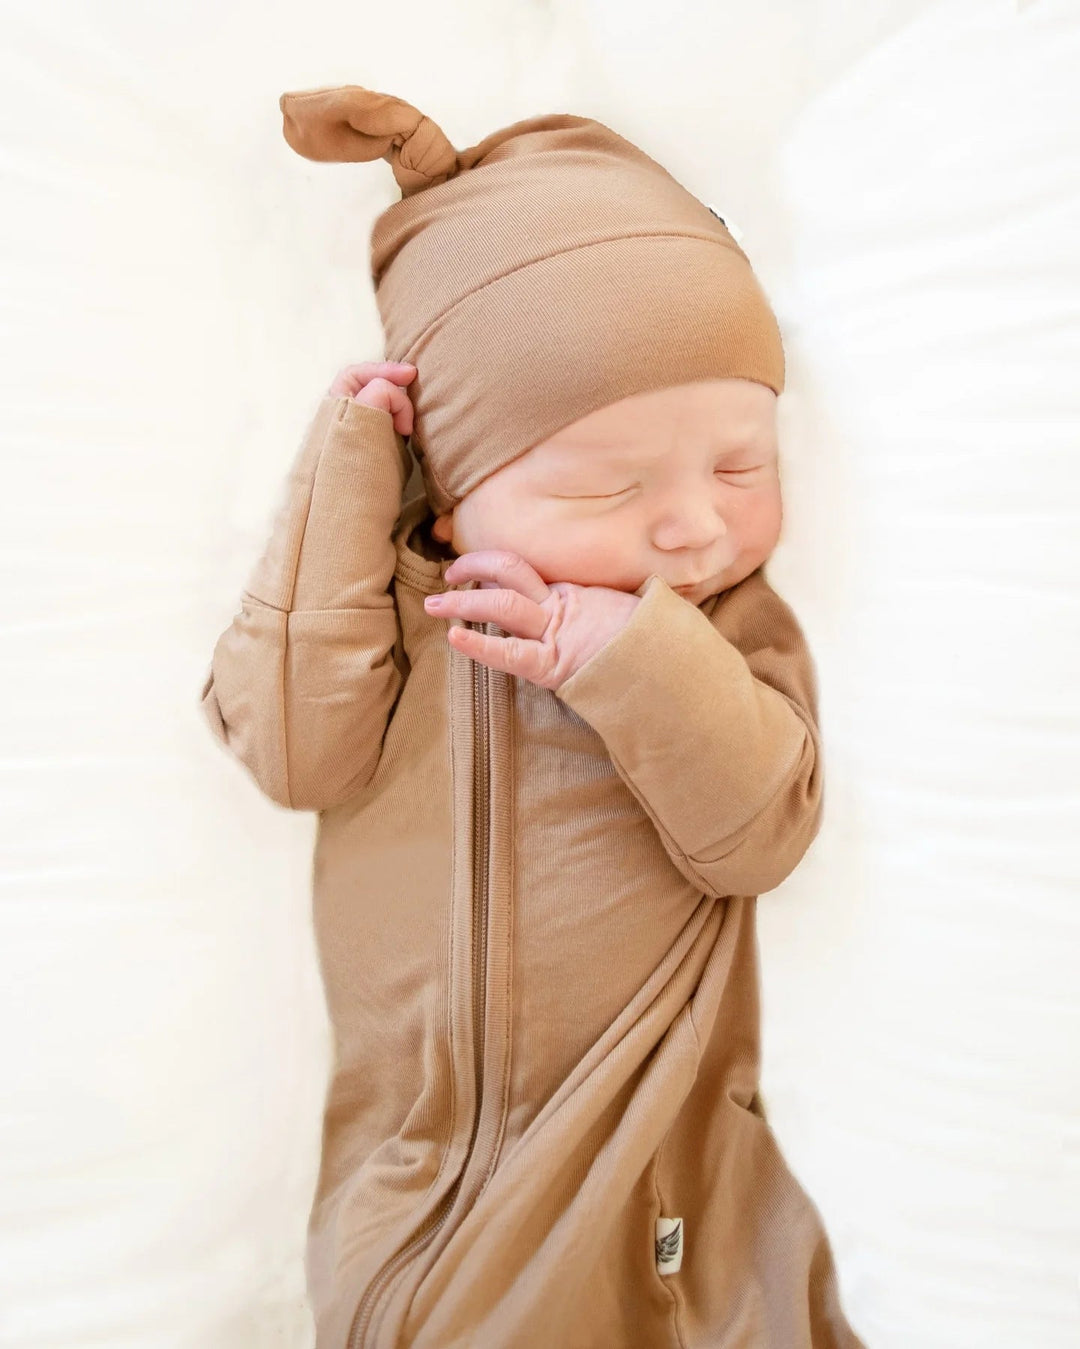 Sleeping Through the Night: Tips for Helping Your Baby Sleep Better - Free Birdees